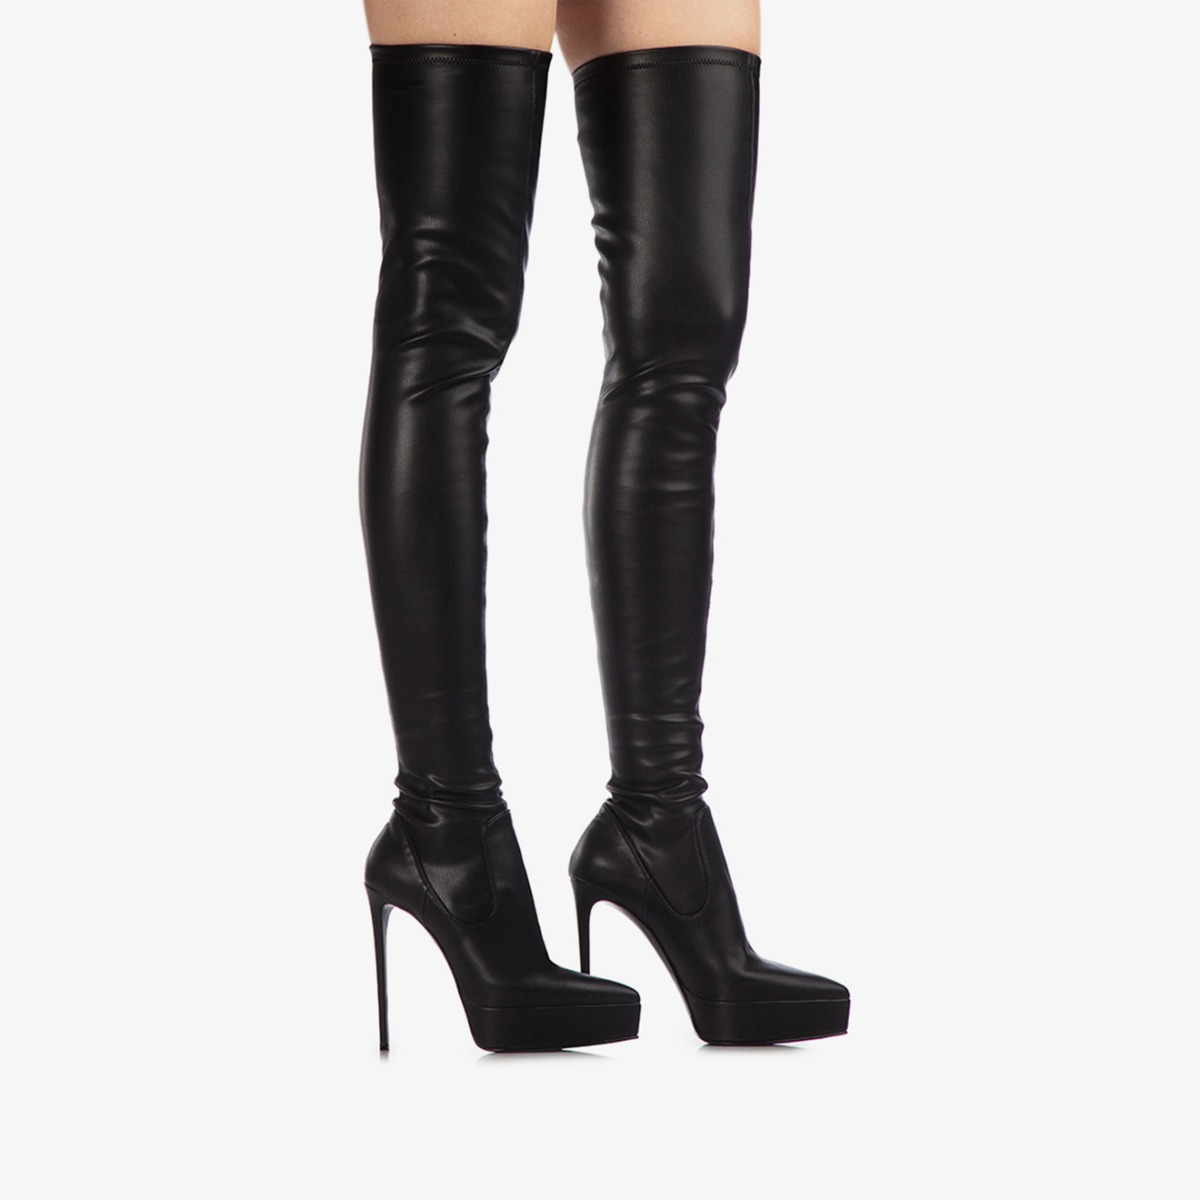 UMA THIGH-HIGH BOOT 140 mm - Le Silla | Official Online Store